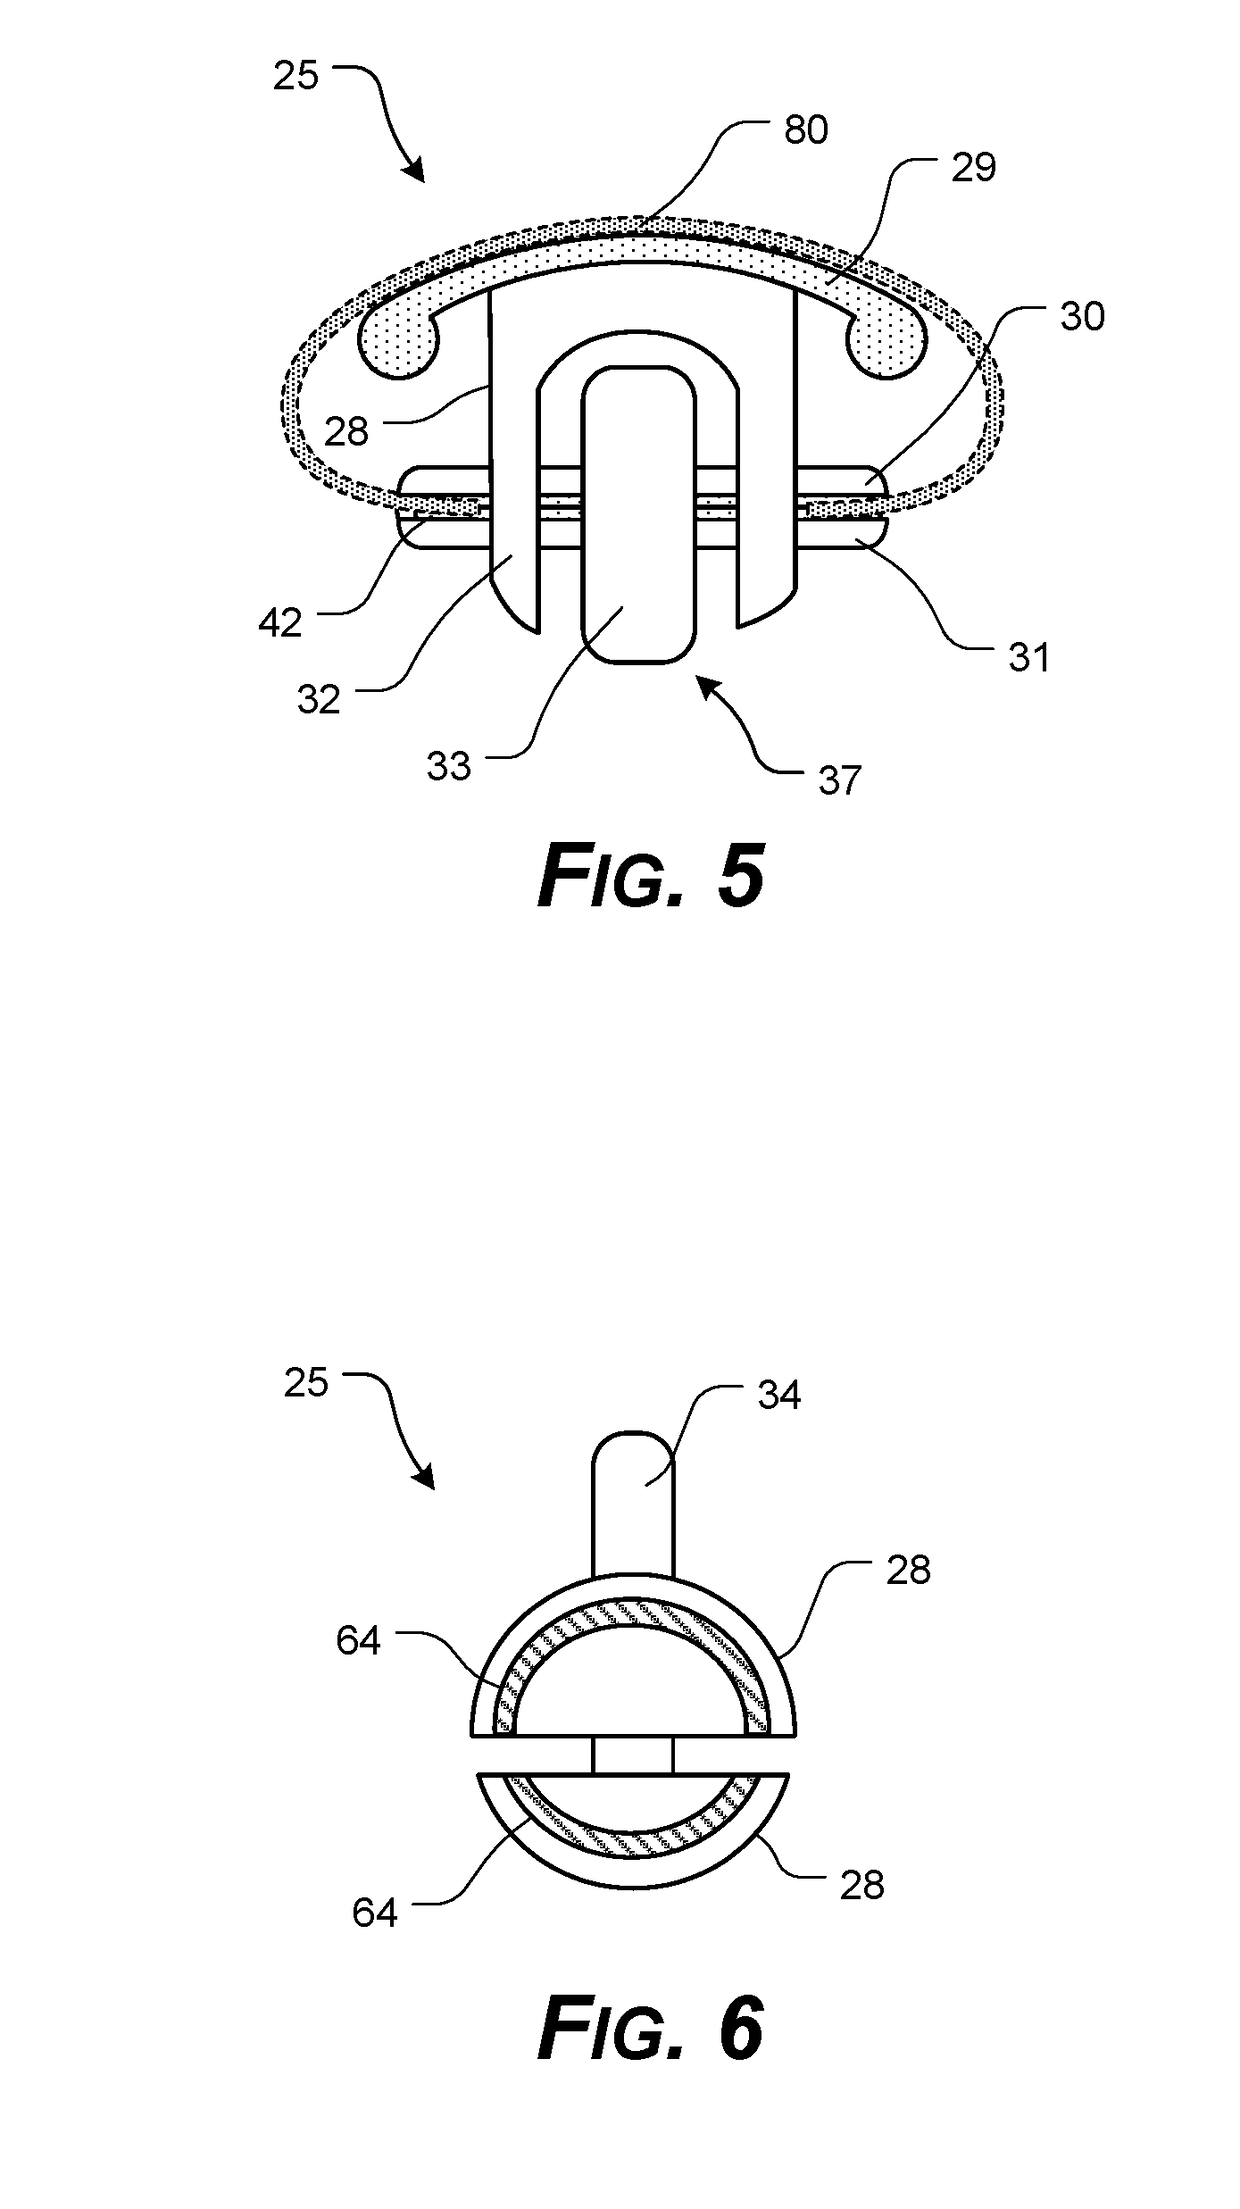 Corneal Transplant Systems, Methods, and Apparatuses